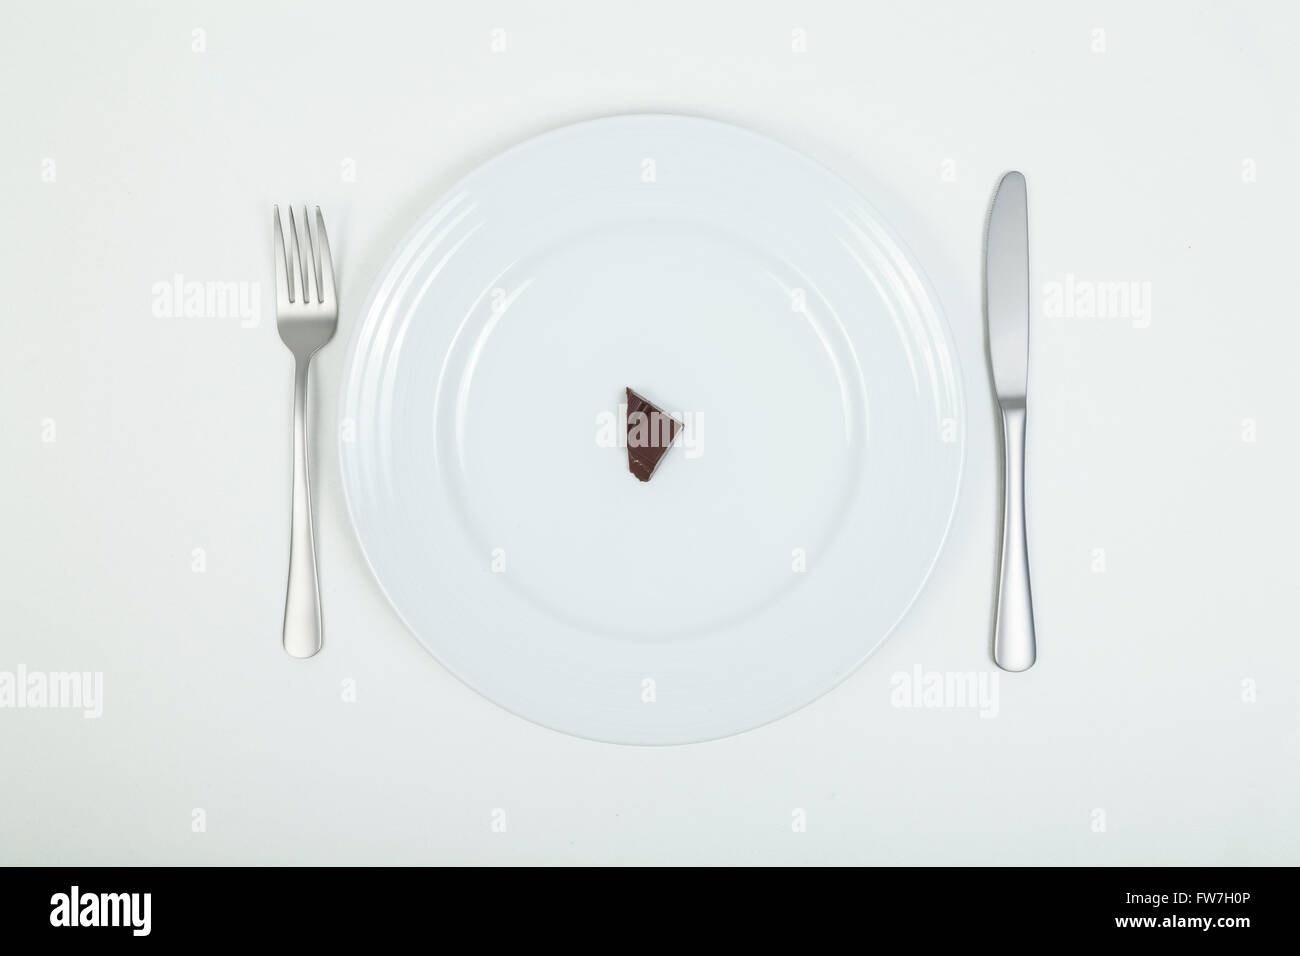 Piece of chocolate on plate Stock Photo